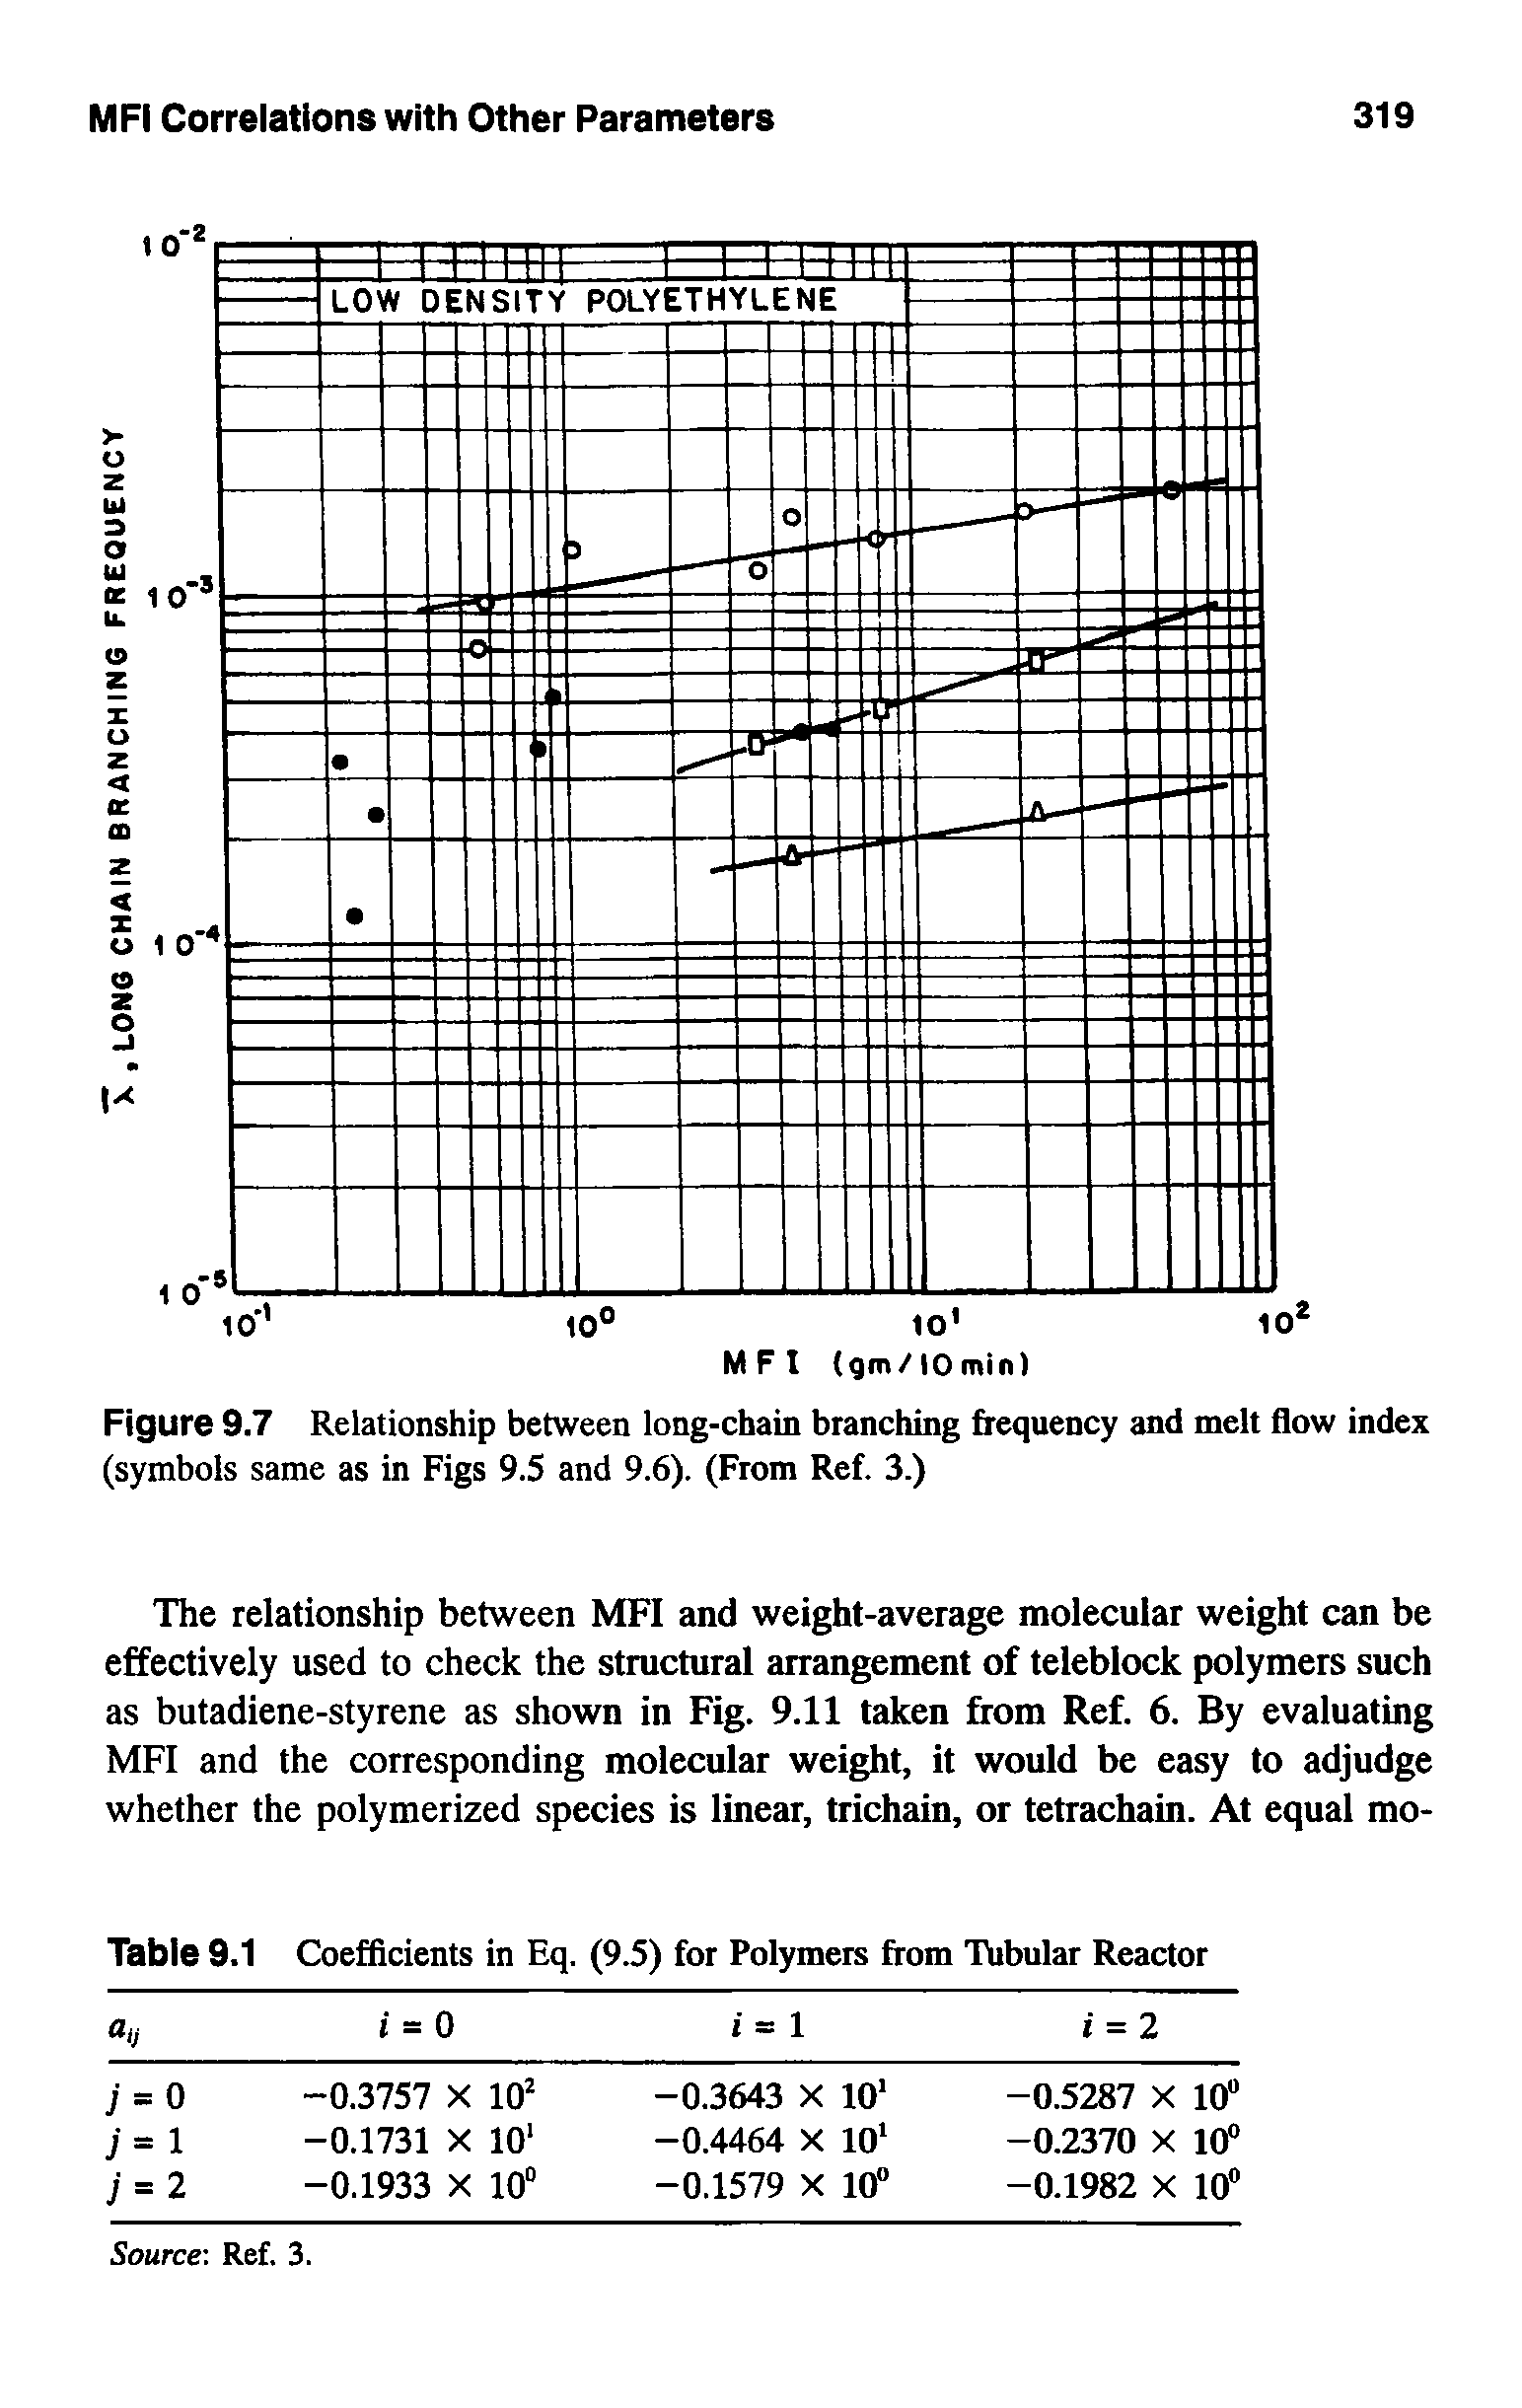 Figure 9.7 Relationship between long-chain branching frequency and melt flow index (symbols same as in Figs 9.5 and 9.6). (From Ref. 3.)...